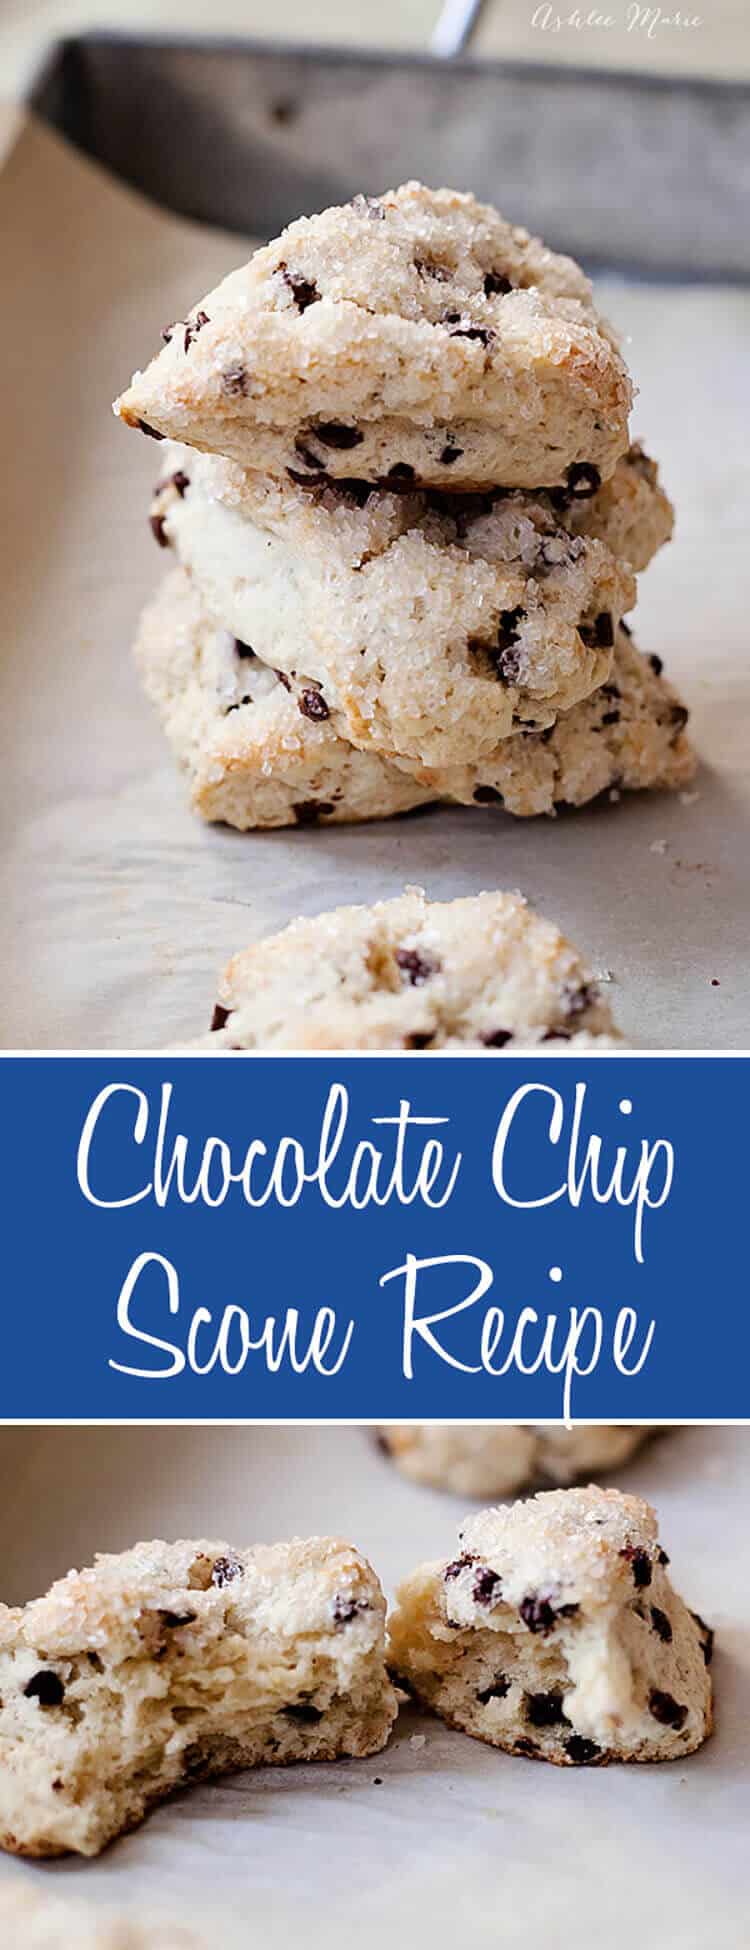 these chocolate chip scones are easy to make with a wonderful texture and great flavor